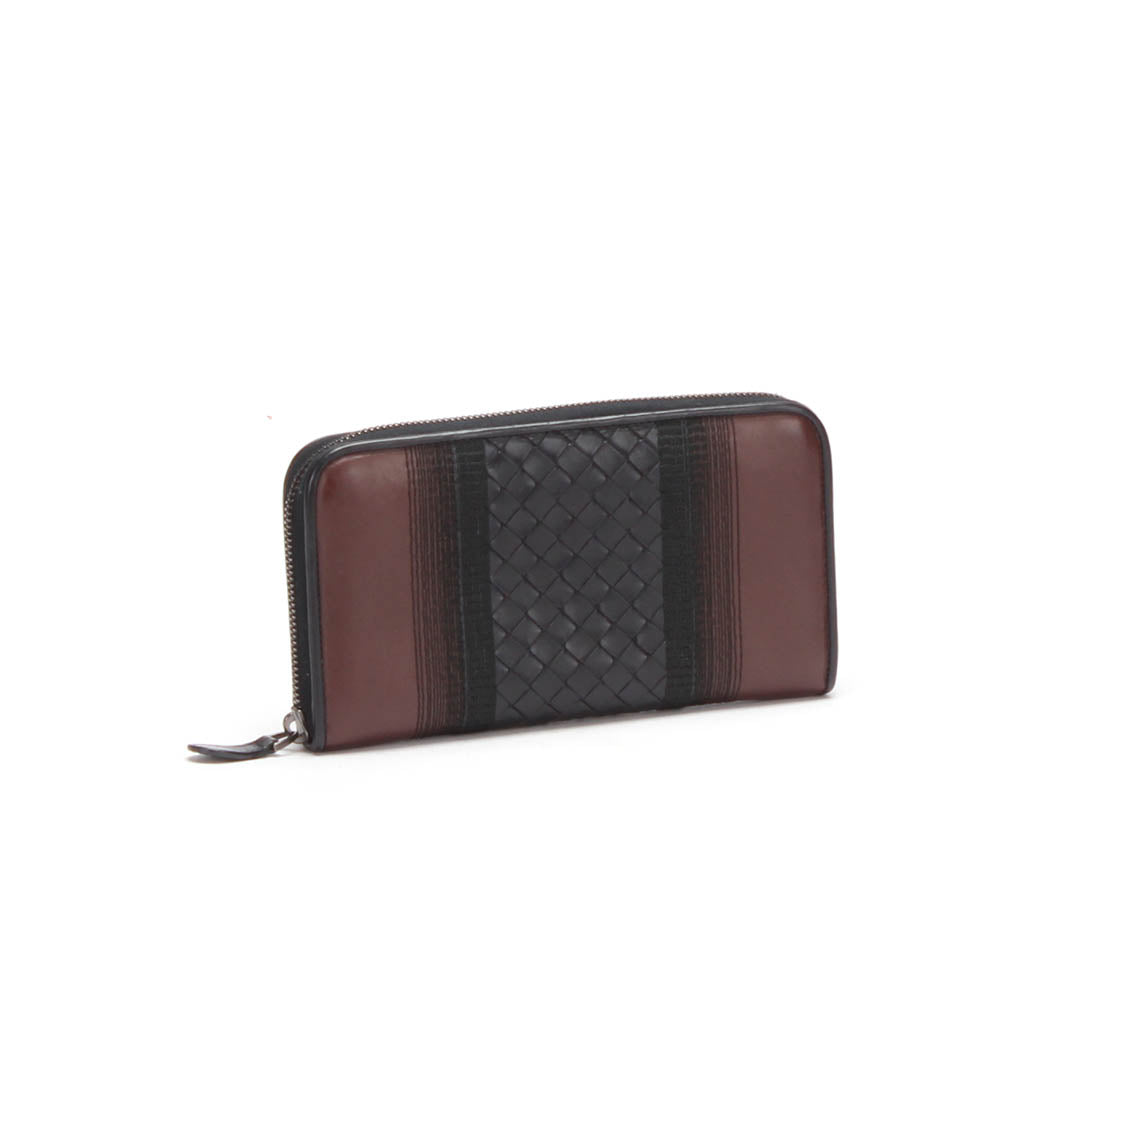 Intrecciato-Trimmed Leather Wallet